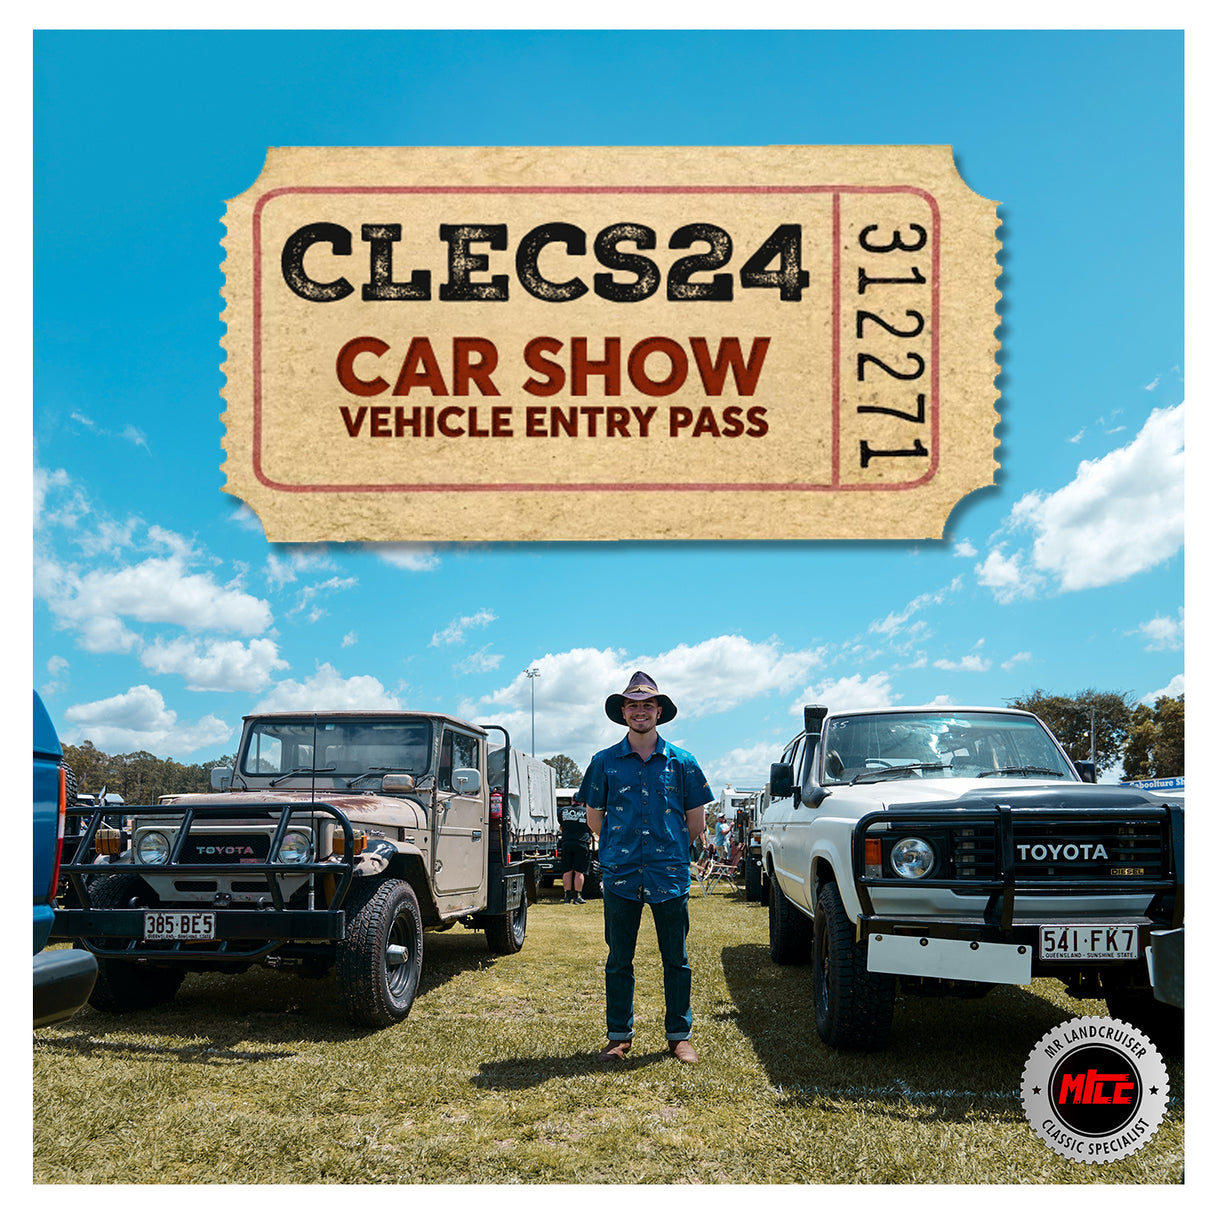 Vehicle Entry Pass for Car Show: CLECS24